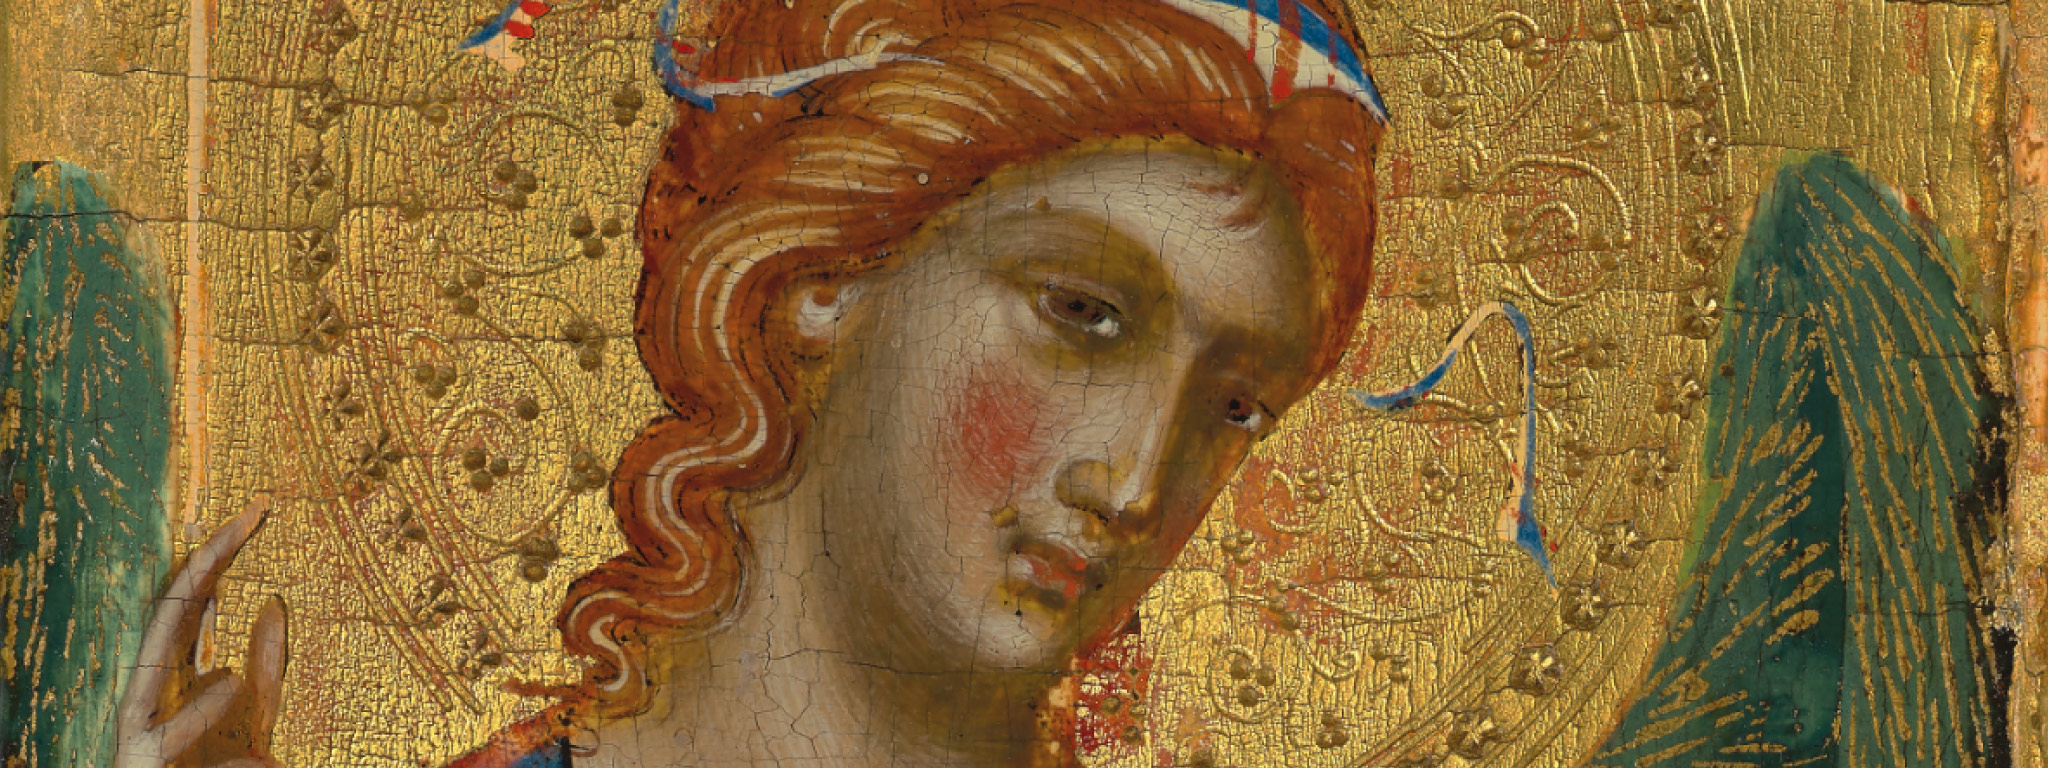 Archangel Michael (detail), about 1340-45, Paolo Veneziano, tempera and gold leaf on panel. Worcester Art Museum, Massachusetts, Museum purchase, 1927.19